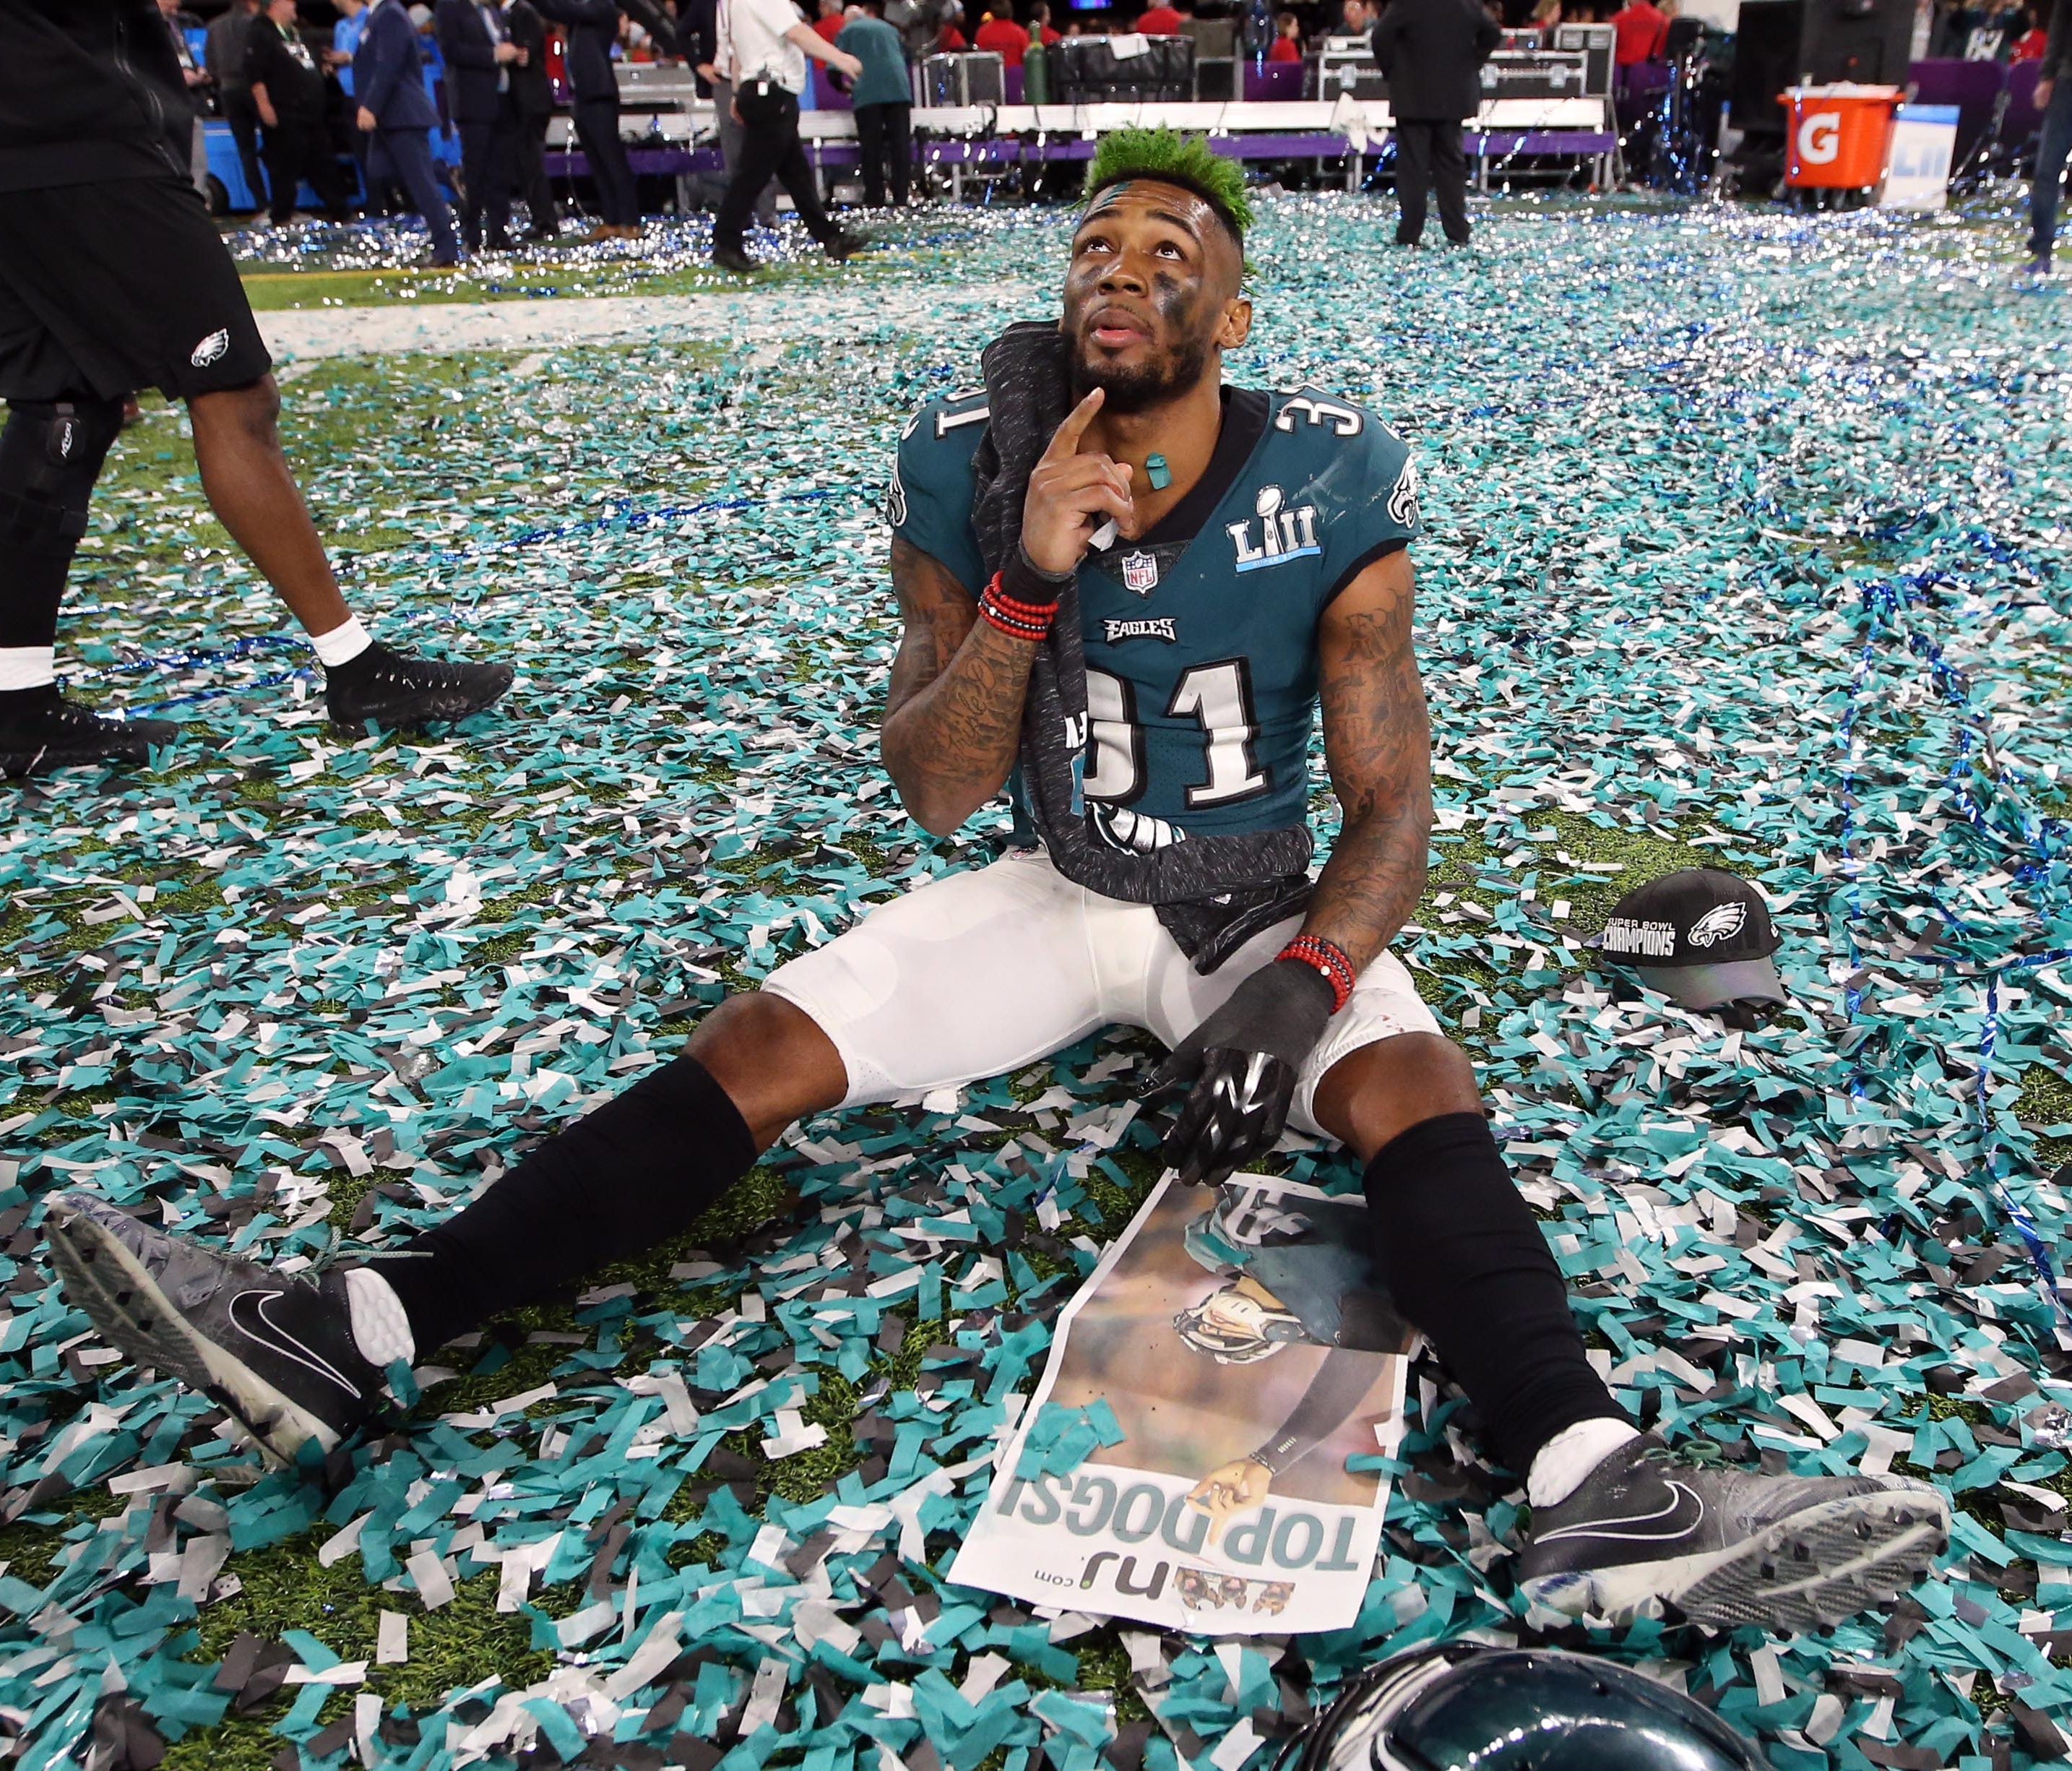 Philadelphia Eagles cornerback Jalen Mills (31) reacts after defeating the New England Patriots in Super Bowl LII at U.S. Bank Stadium.